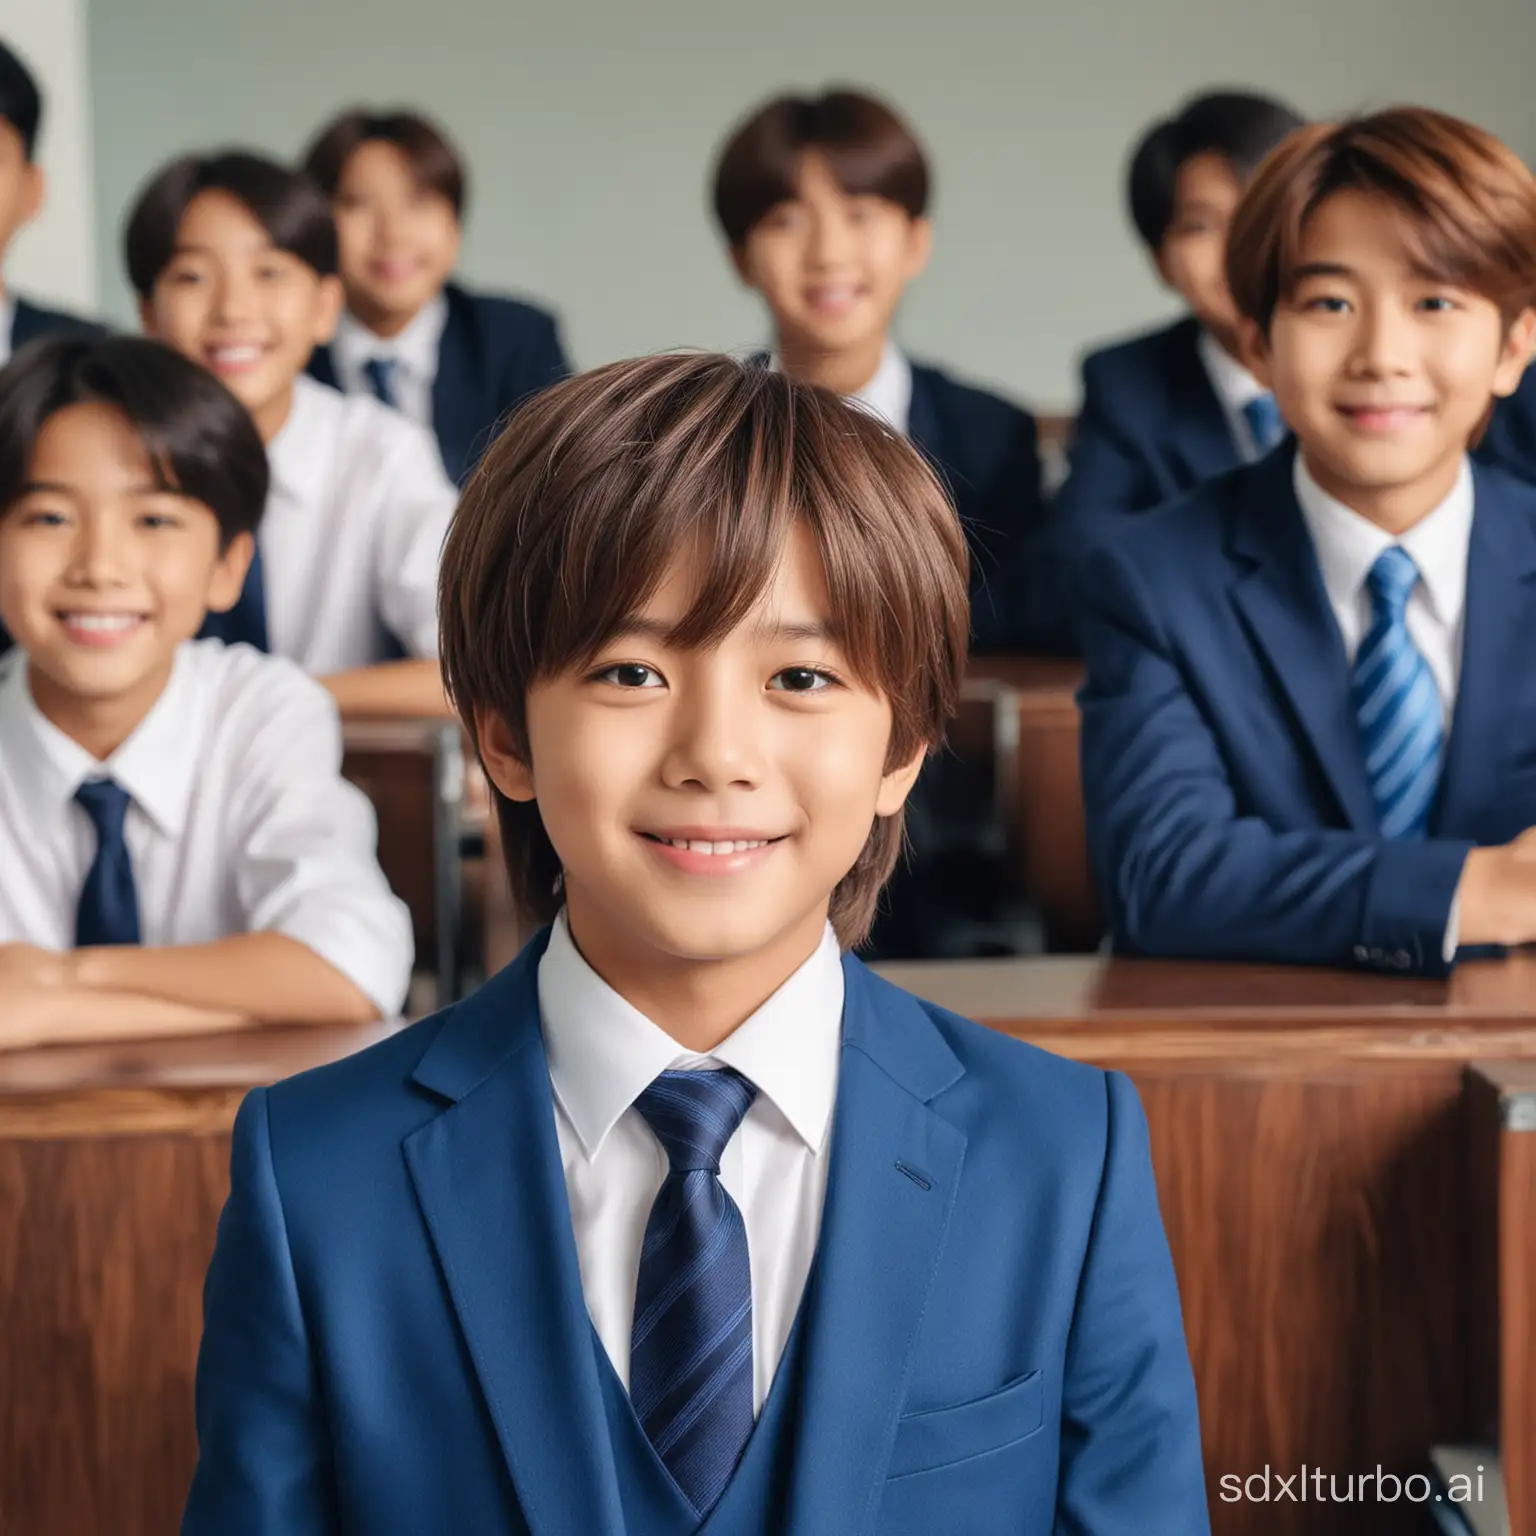 7YearOld-Boy-in-BTS-JinInspired-Blue-Suit-Smiling-in-Classroom